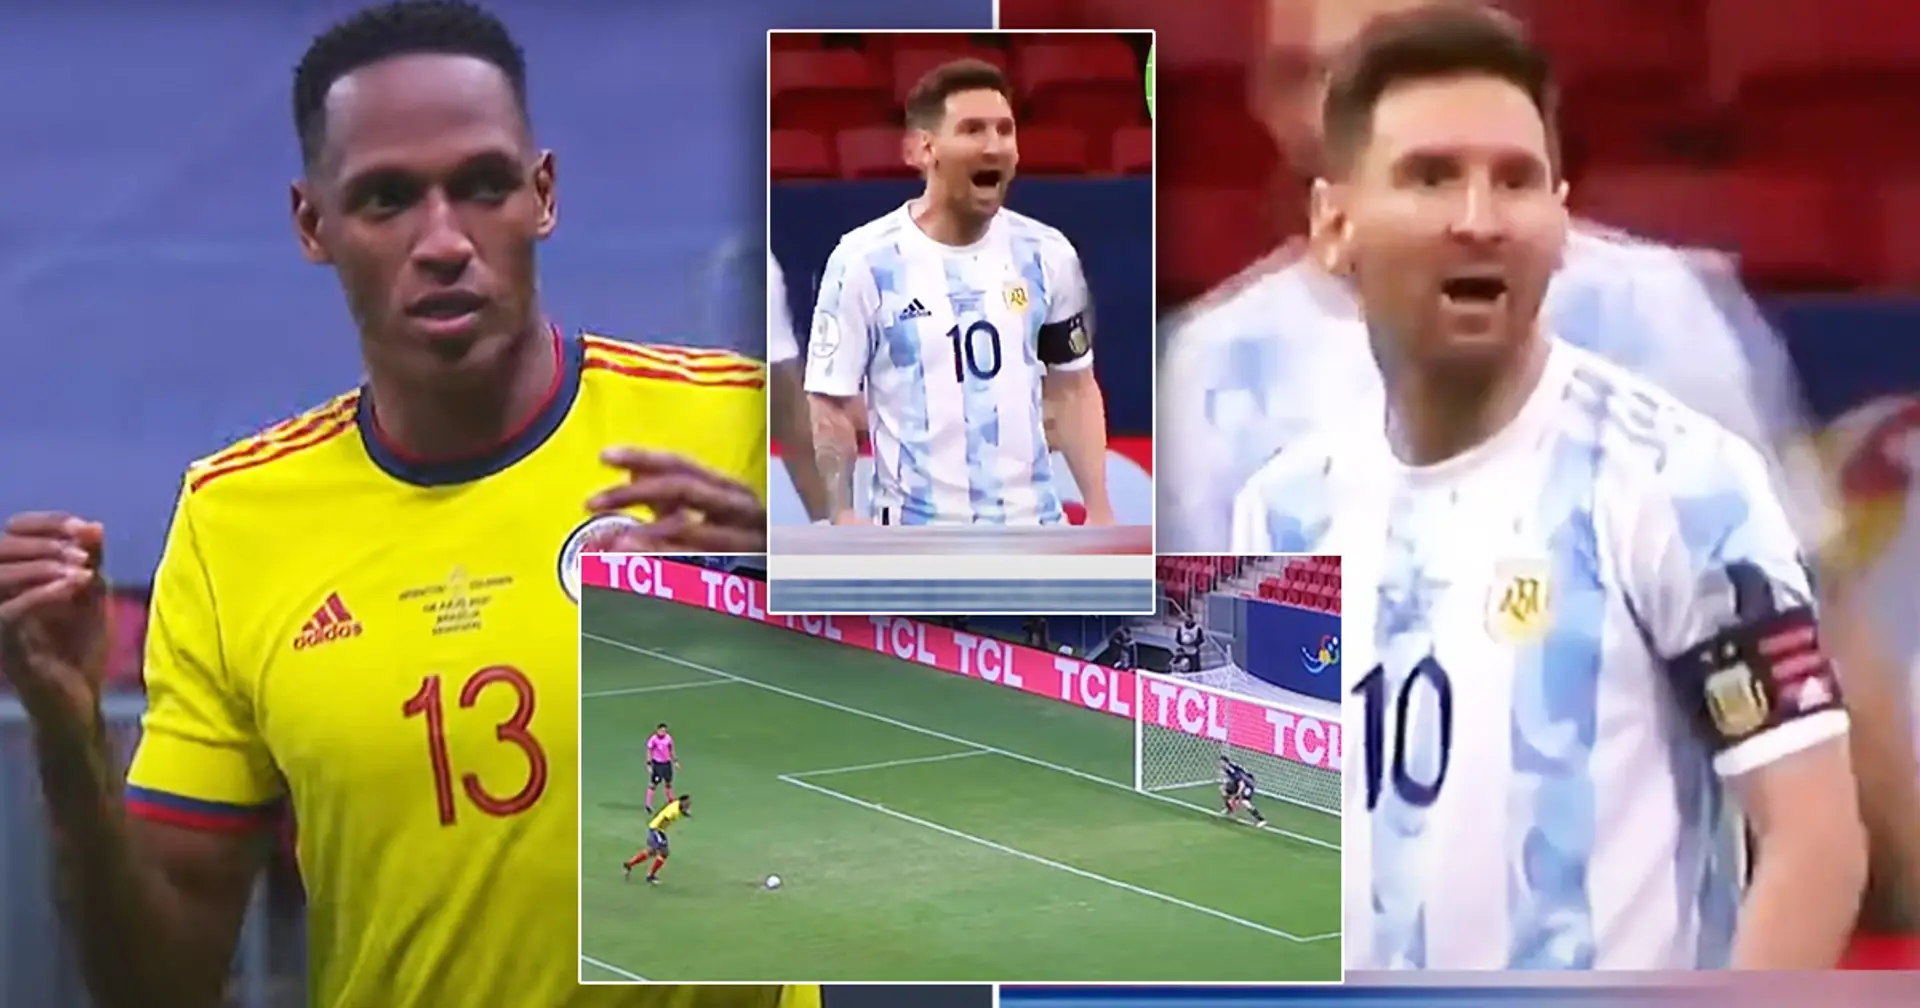 Lionel Messi screams ‘Dance now! to Yerry Mina after he misses crucial penalty